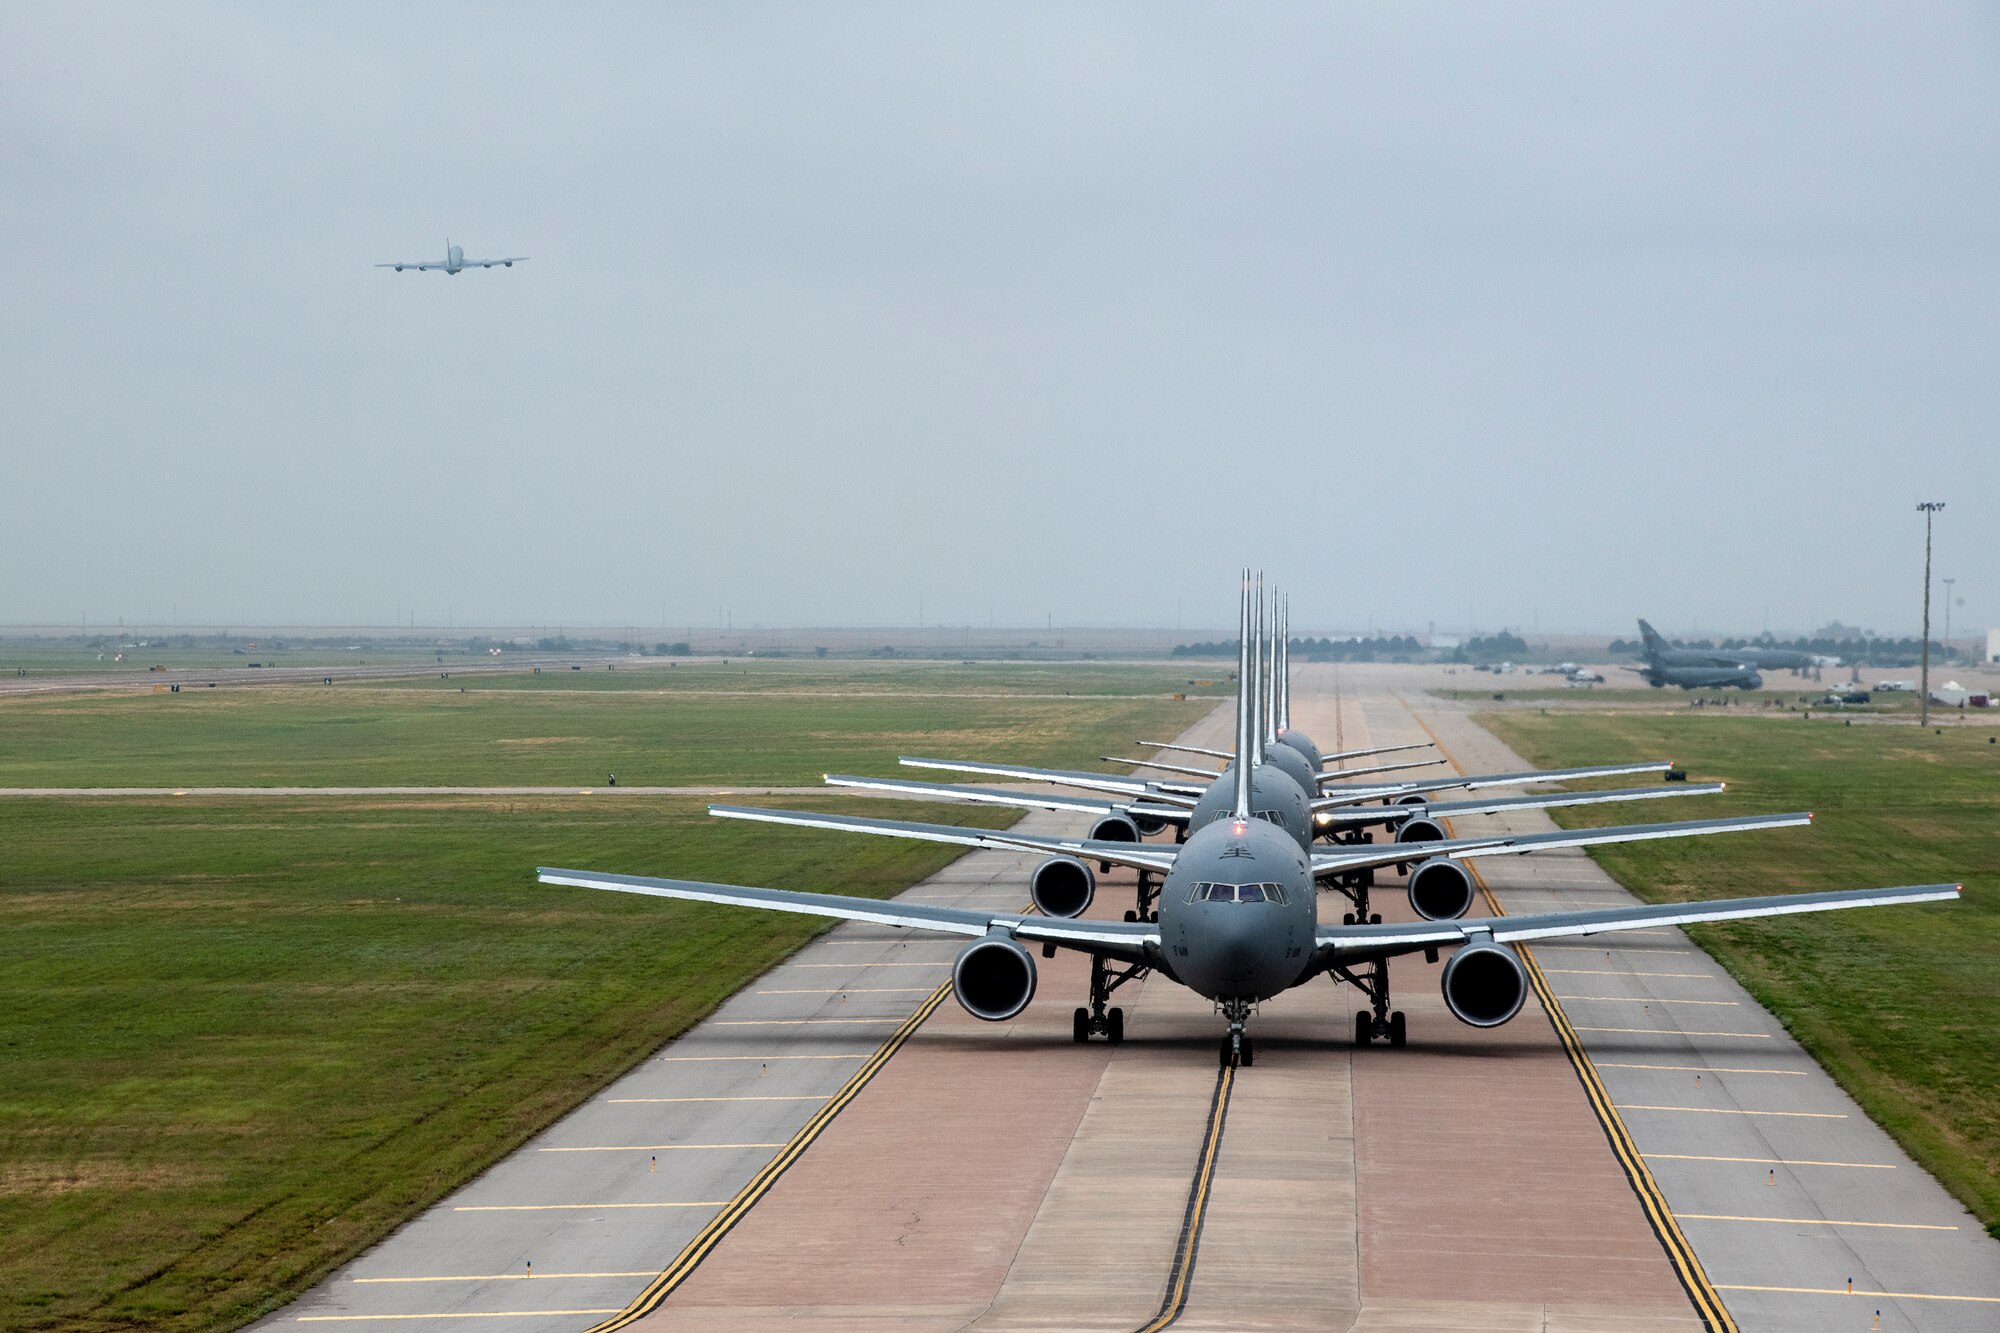 U.S. Air Force KC-46 Pegasus aircraft line up for departure at Altus Air Force Base, Oklahoma, during a large formation exercise, May 21, 2020.